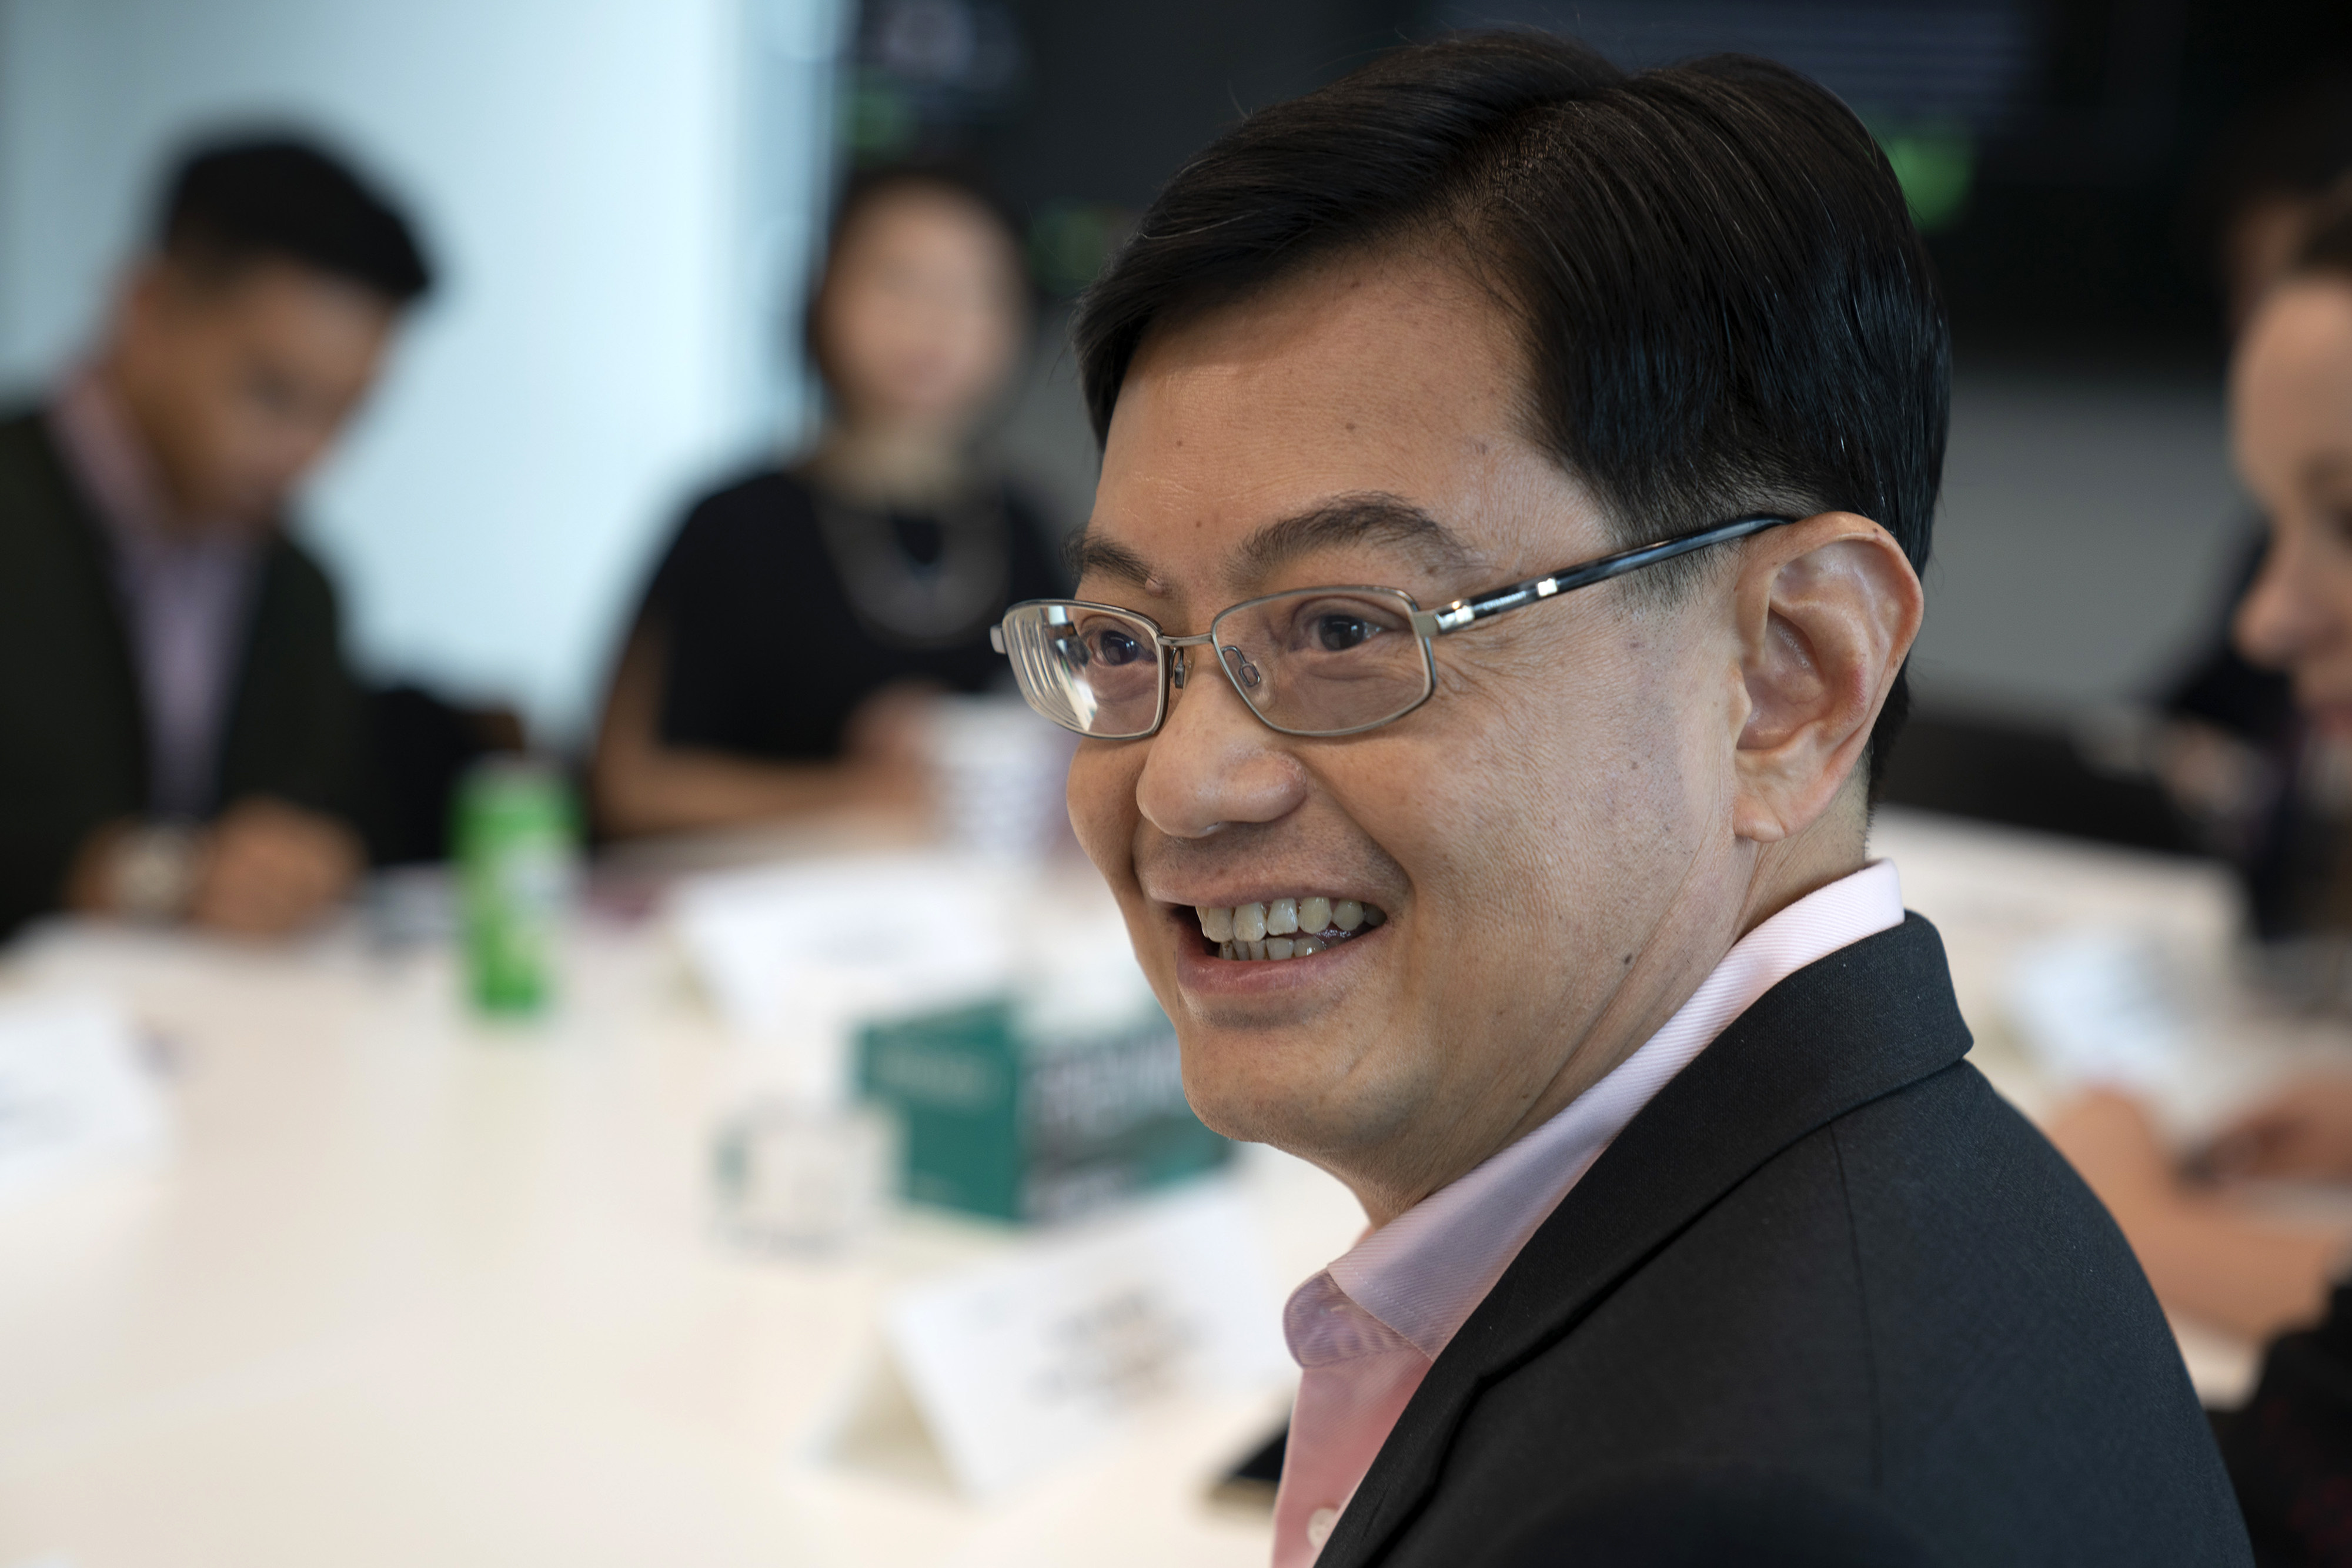 Heng Swee Keat, Singapore’s deputy prime minister and finance minister, pictured at a meeting in February 2020. Photo: Bloomberg